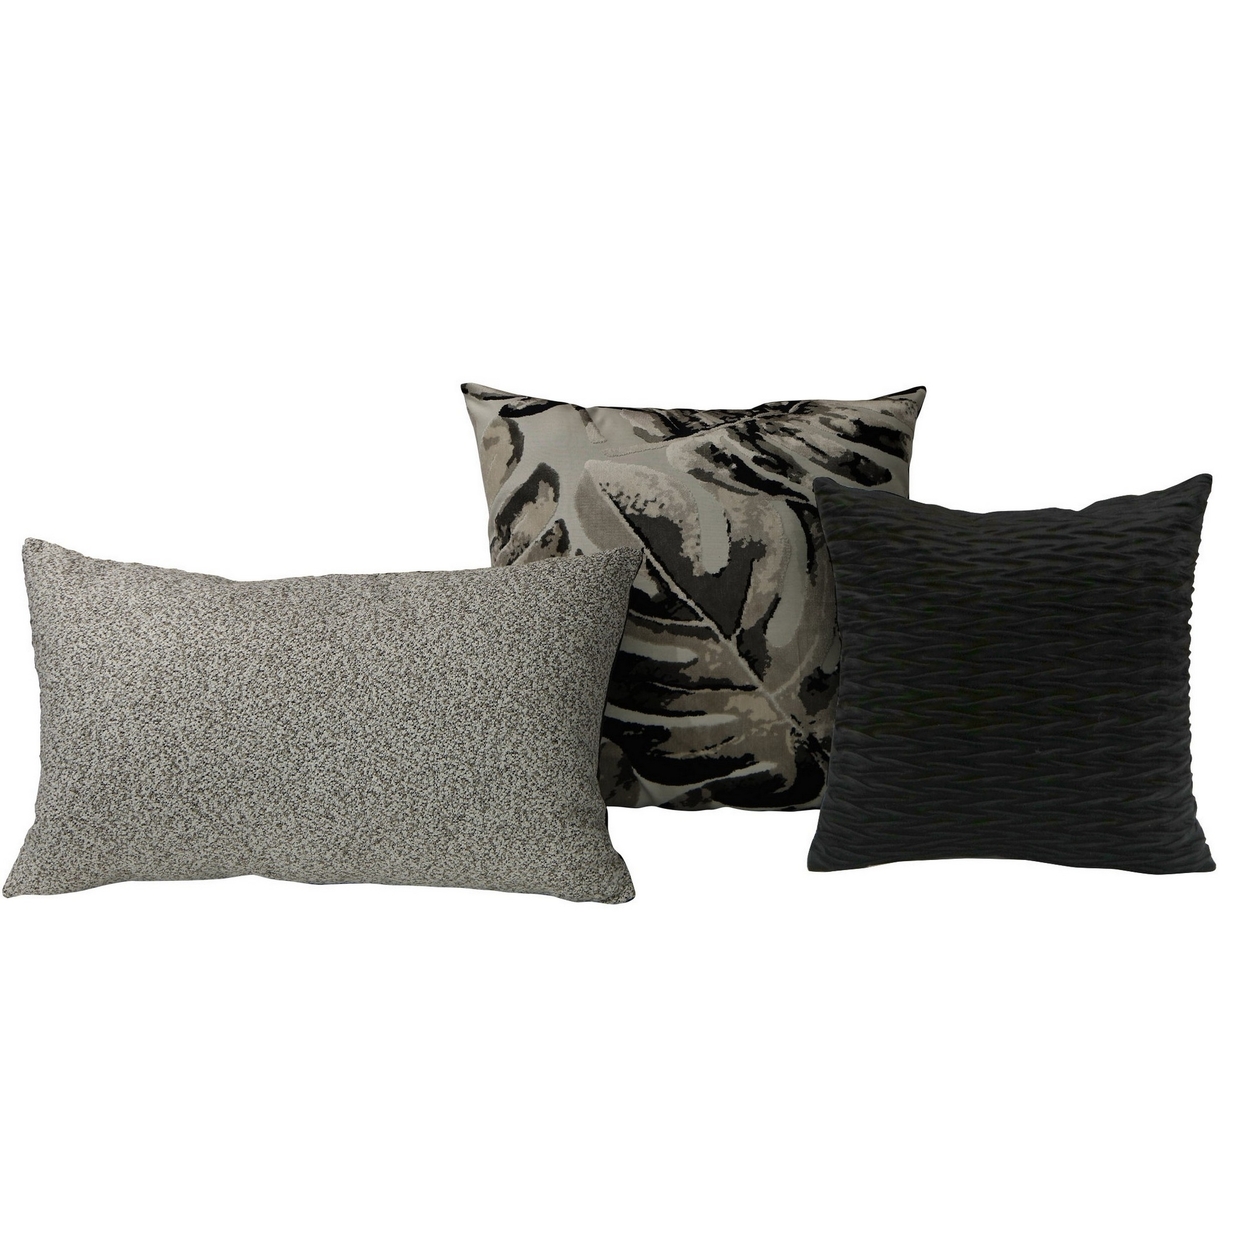 3 Neutral Accent Throw Pillows With Monstera Leaf, Velvet Charcoal Gray - Saltoro Sherpi